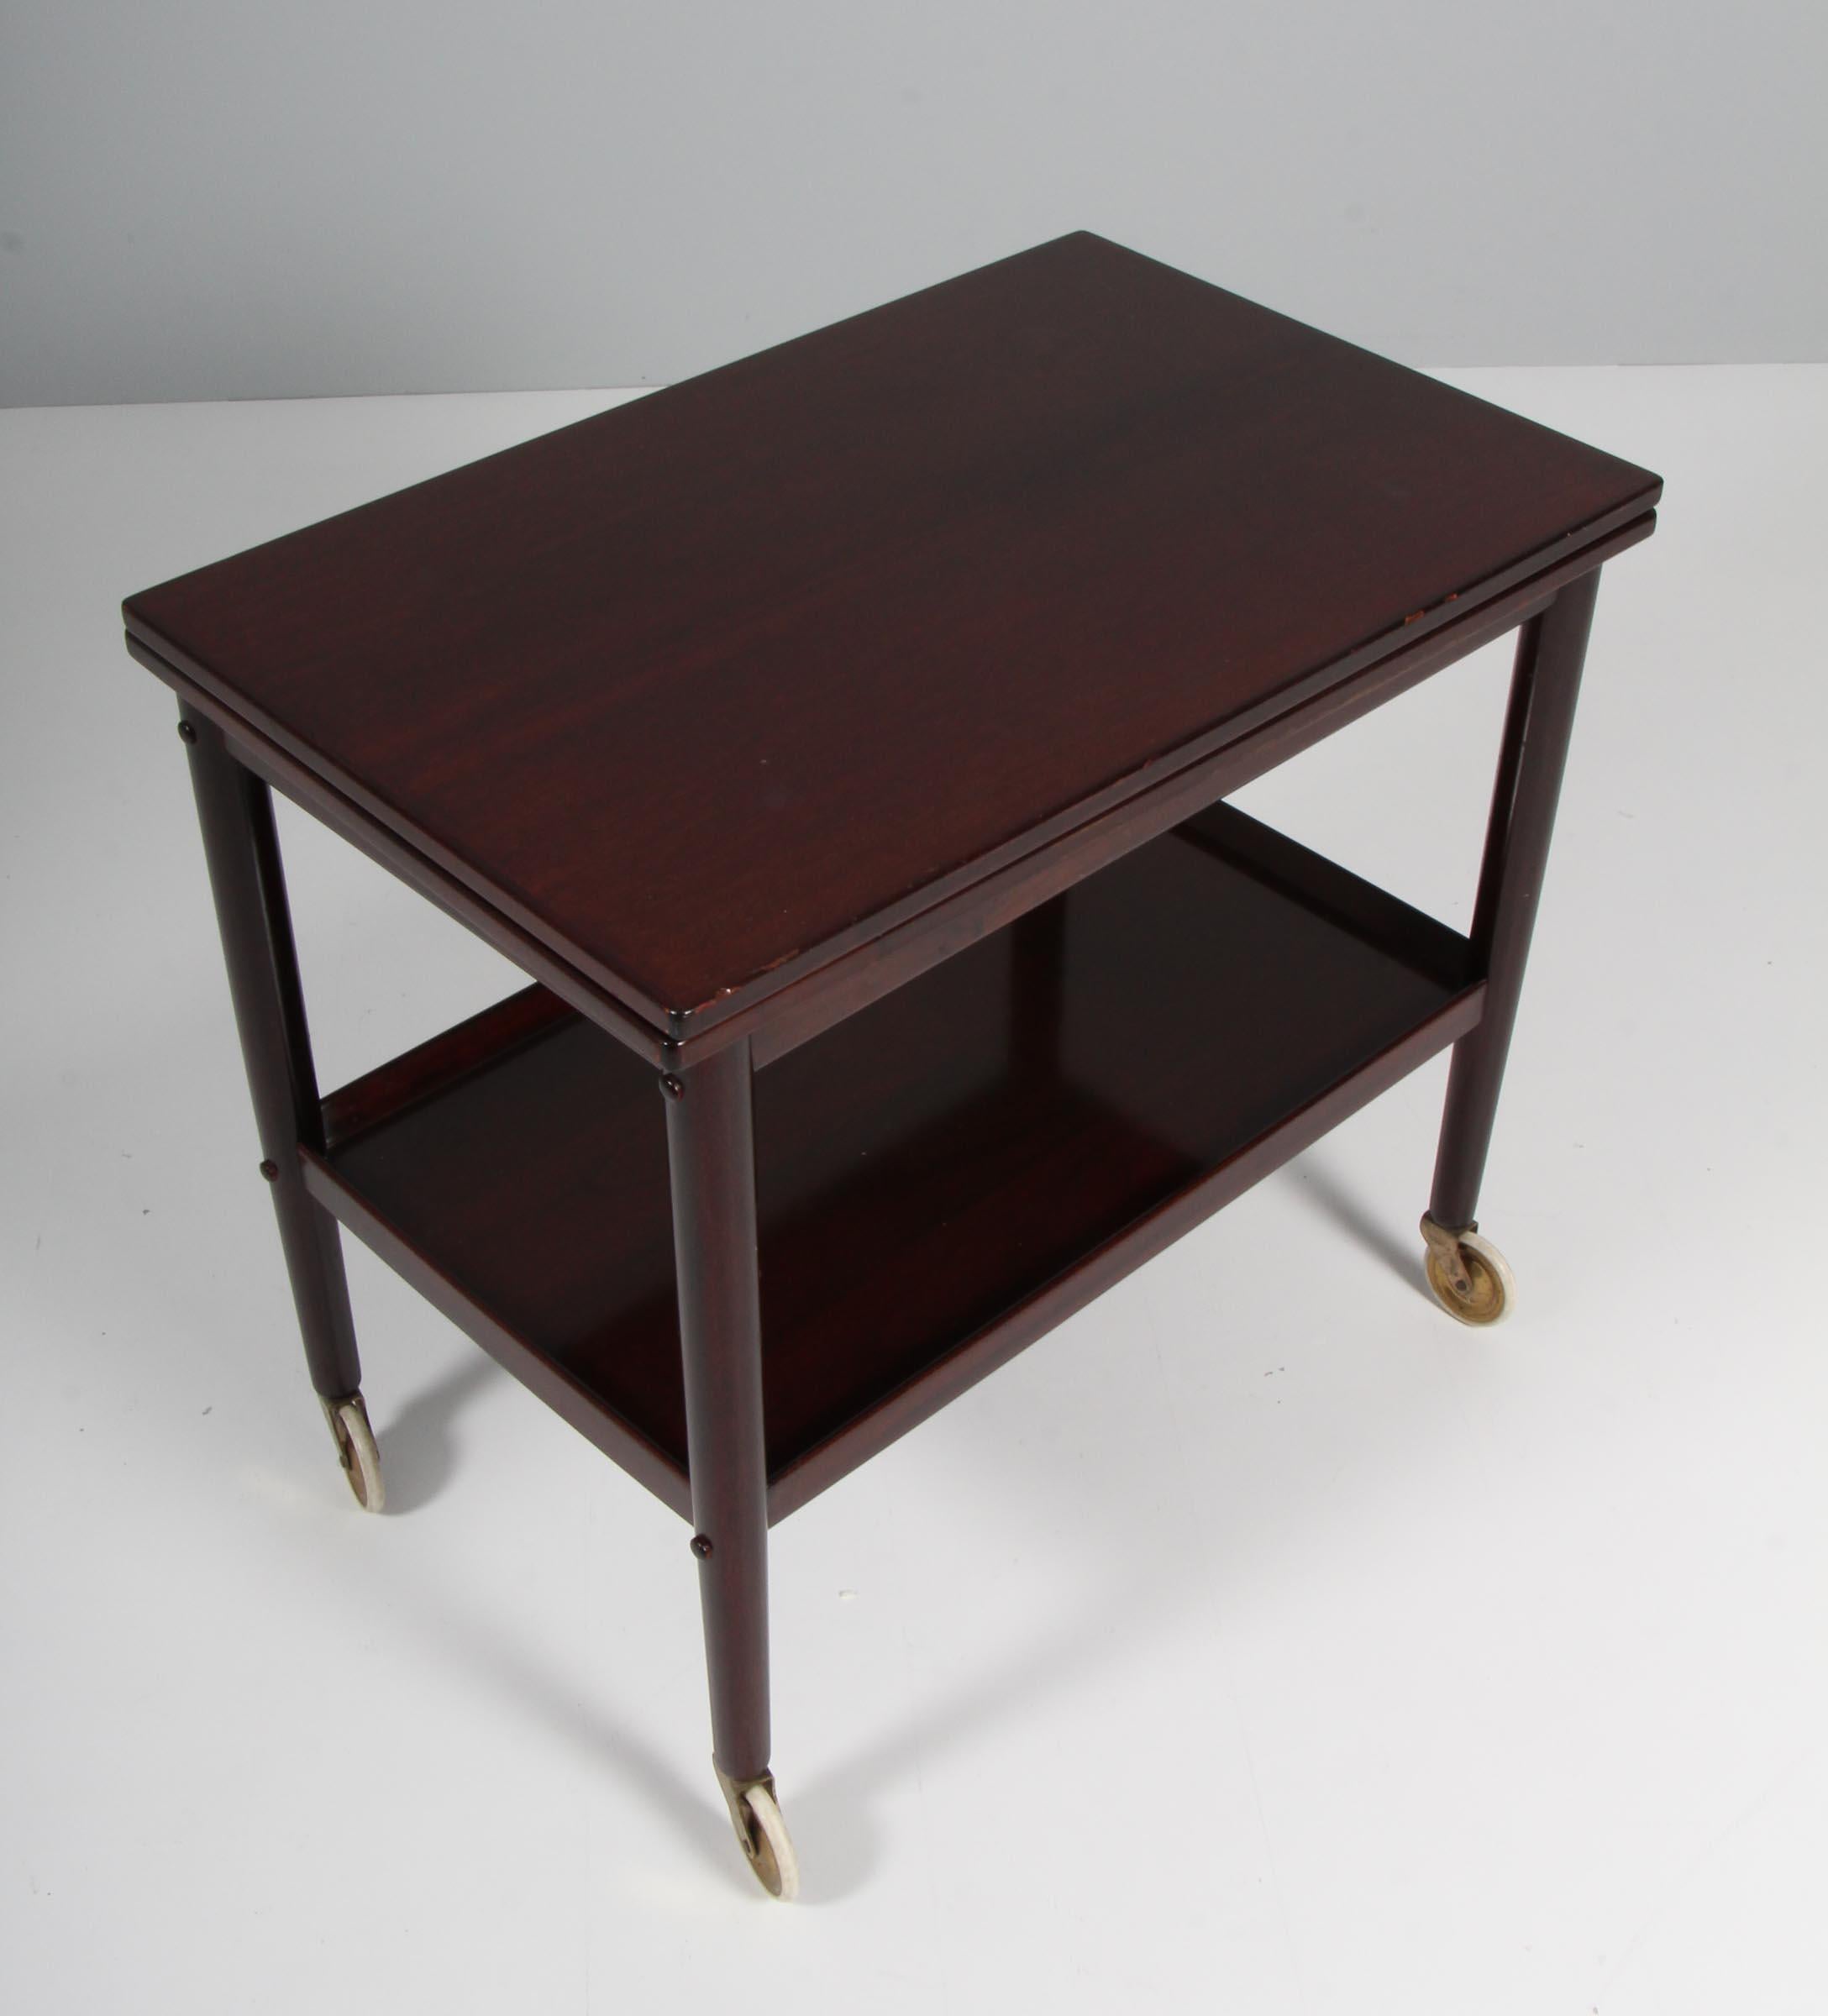 Ole Wanscher bar cart / tray cart with frame of mahogany. Foldable top with a width of 44/88 cm. 

Buttom tray of mahogany

Model Rungstedlund, made by Poul Jeppesen.

